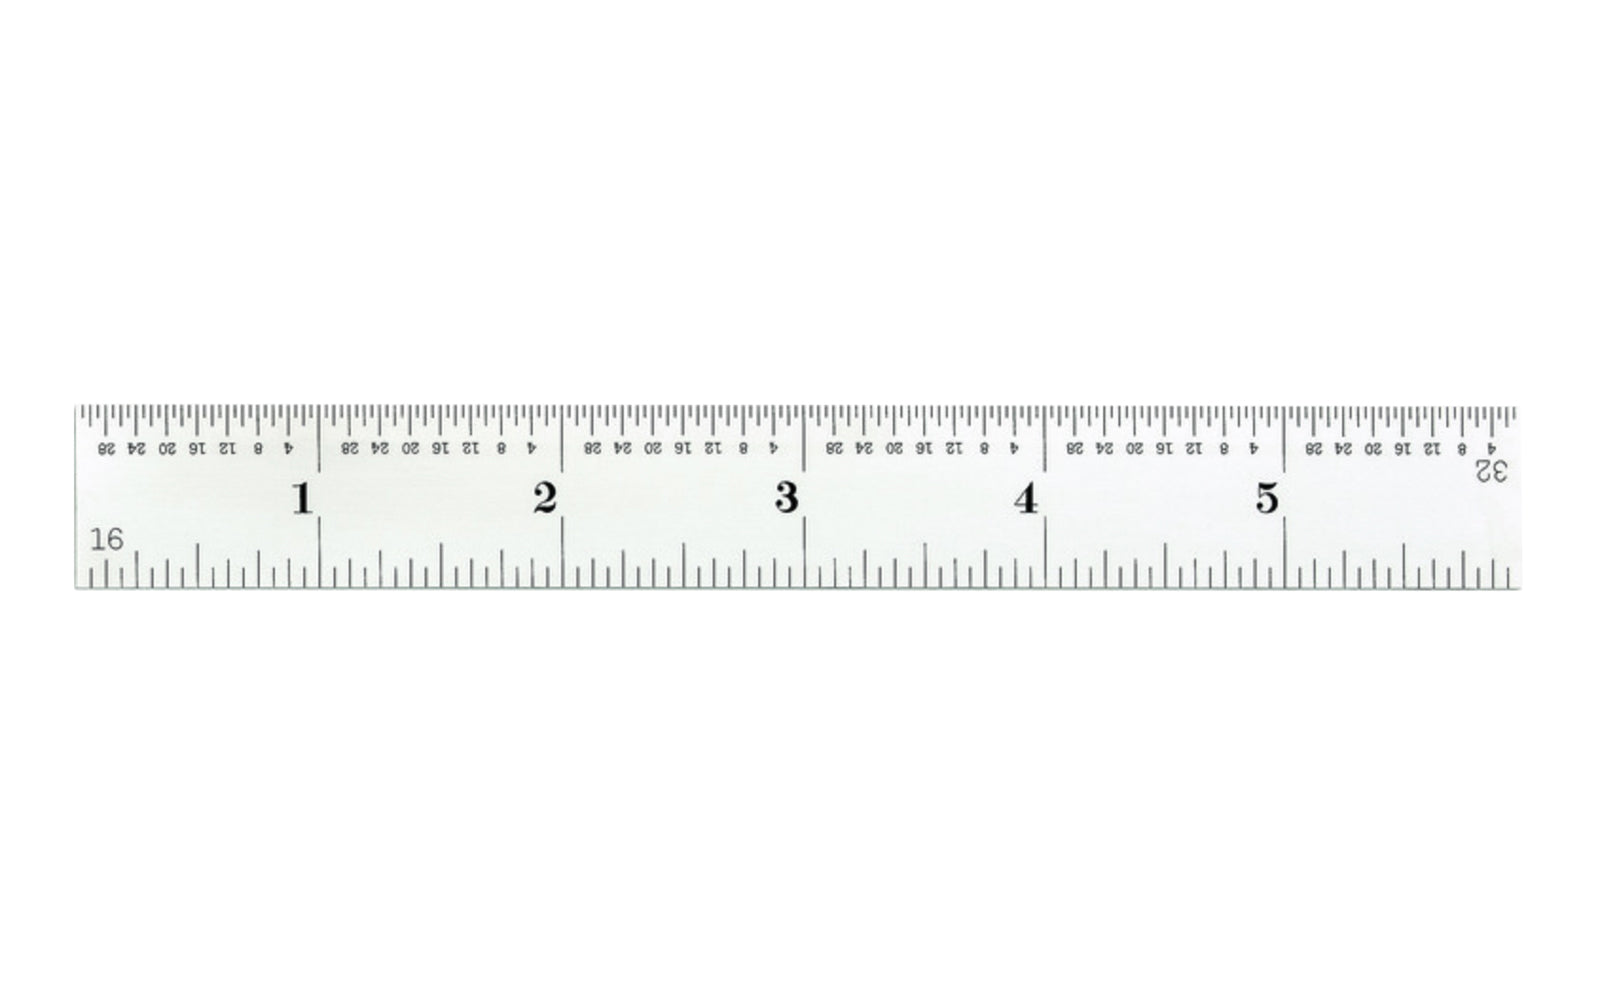 Starrett 6" Rule - 1/16", 1/32", 1/64", 1/100" Grads. Starrett 6" (150mm) Spring-Tempered Steel Rule with Millimeter and Inch Graduation features a satin chrome finish. Graduations at 32nds and 1/2mm on one side; 64ths and mm on reverse.   Made in USA.